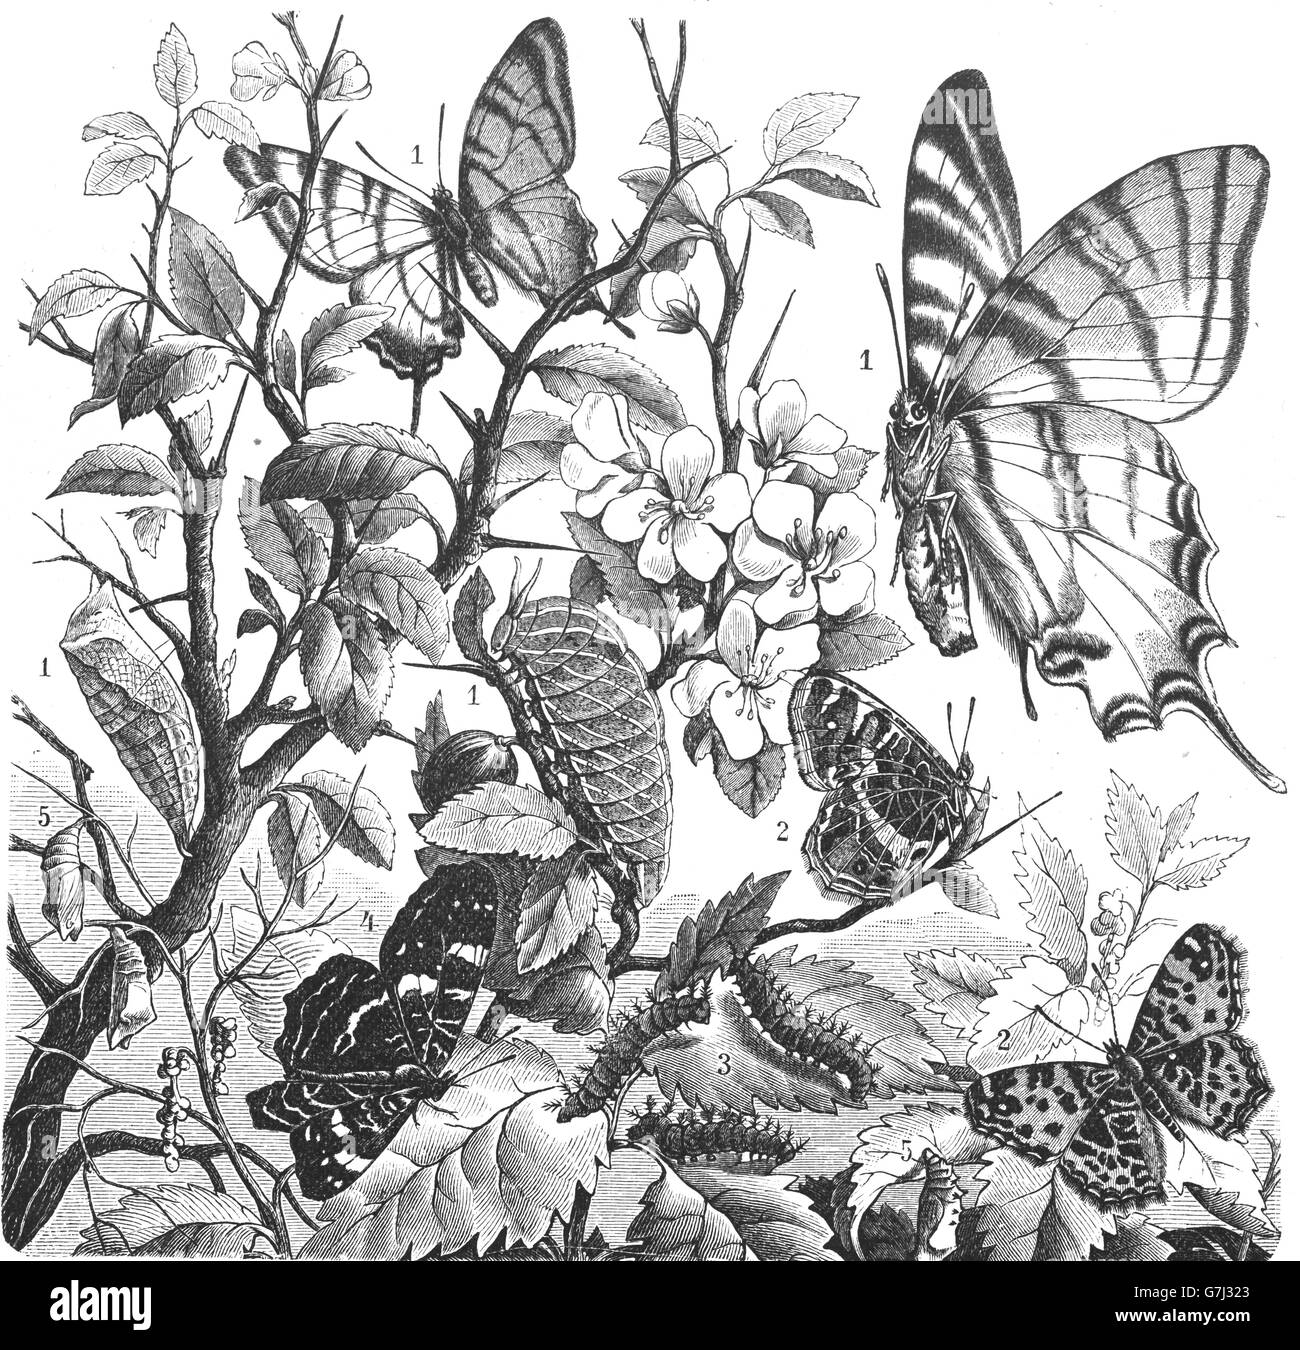 Scarce Swallowtail and Vanessa levana butterfly, illustration from book dated 1904 Stock Photo